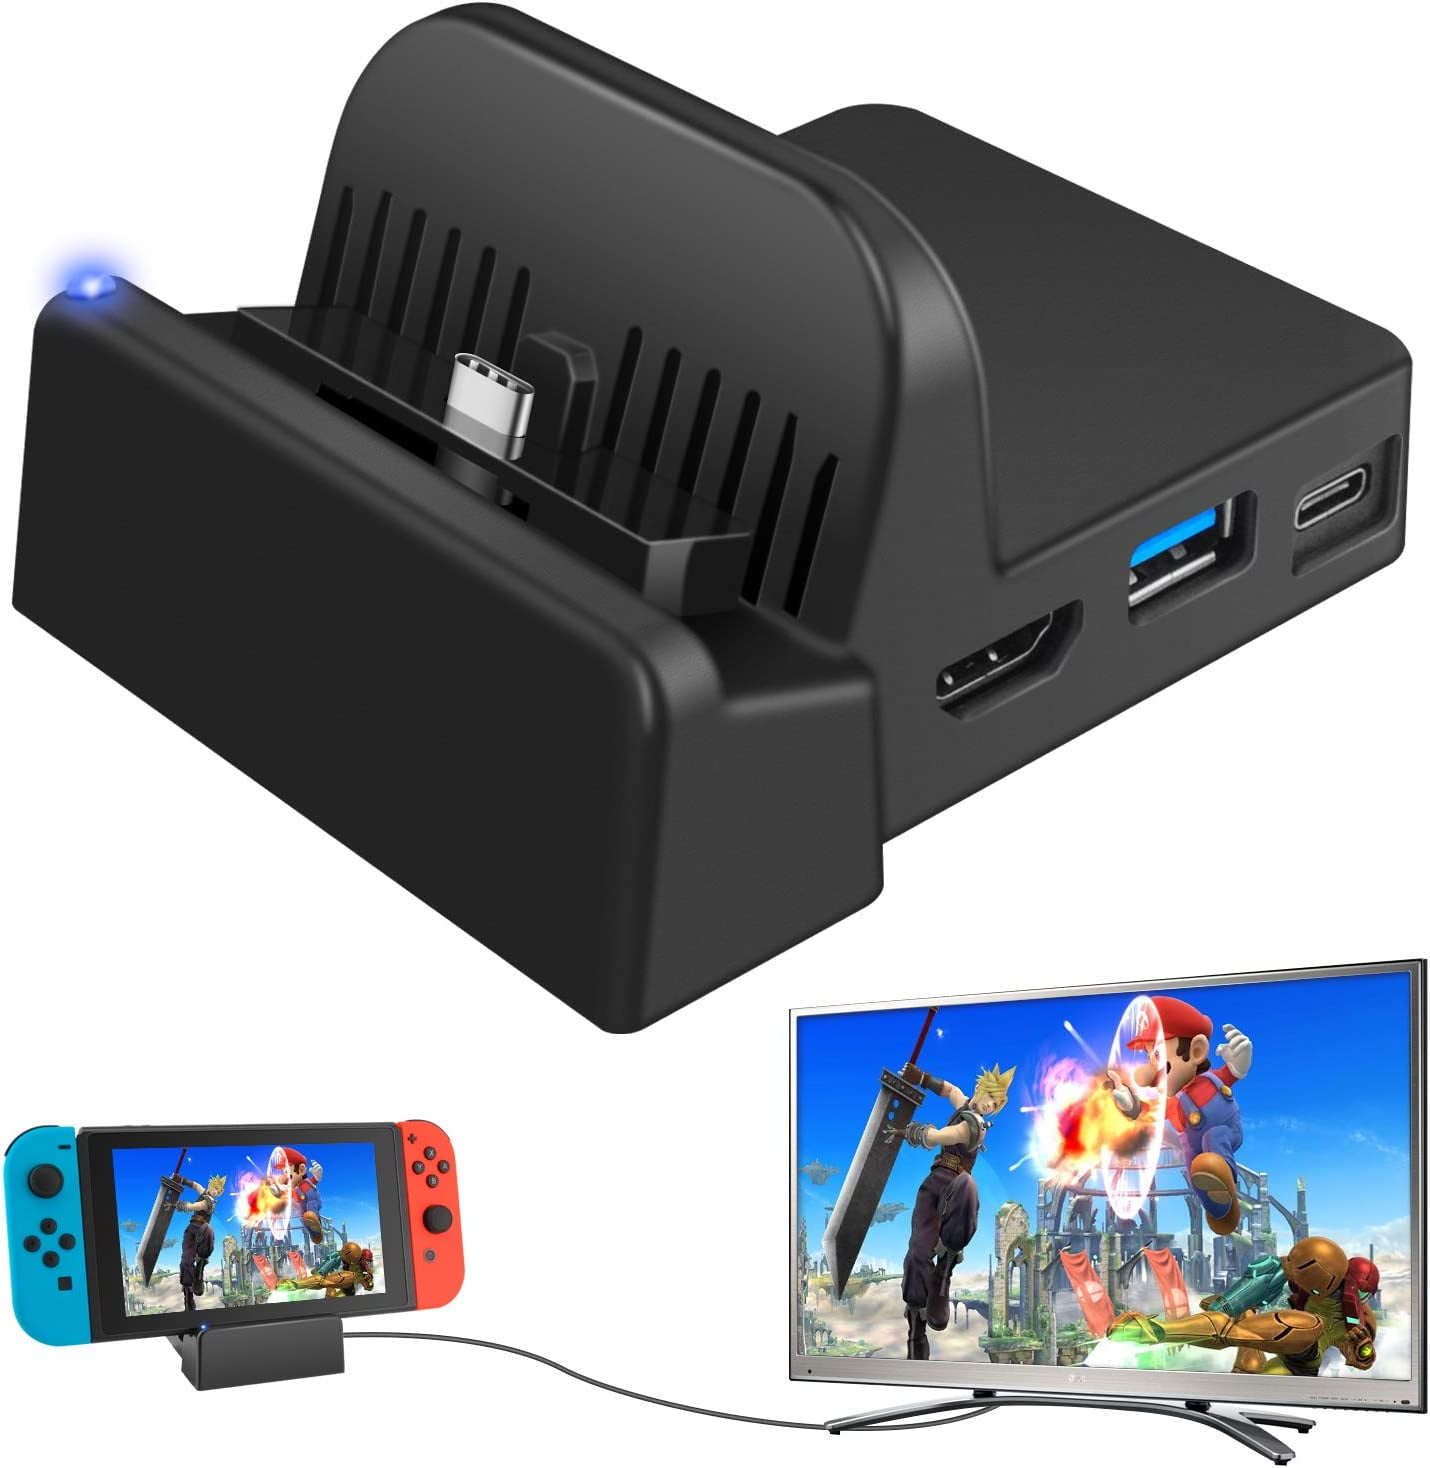 Docking Station for Nintendo Switch/Switch Charging Dock 4K HDMI TV Adapter Charger Set Replacement Compatible with Official Nintendo Switch Dock Charging Cable) - Walmart.com